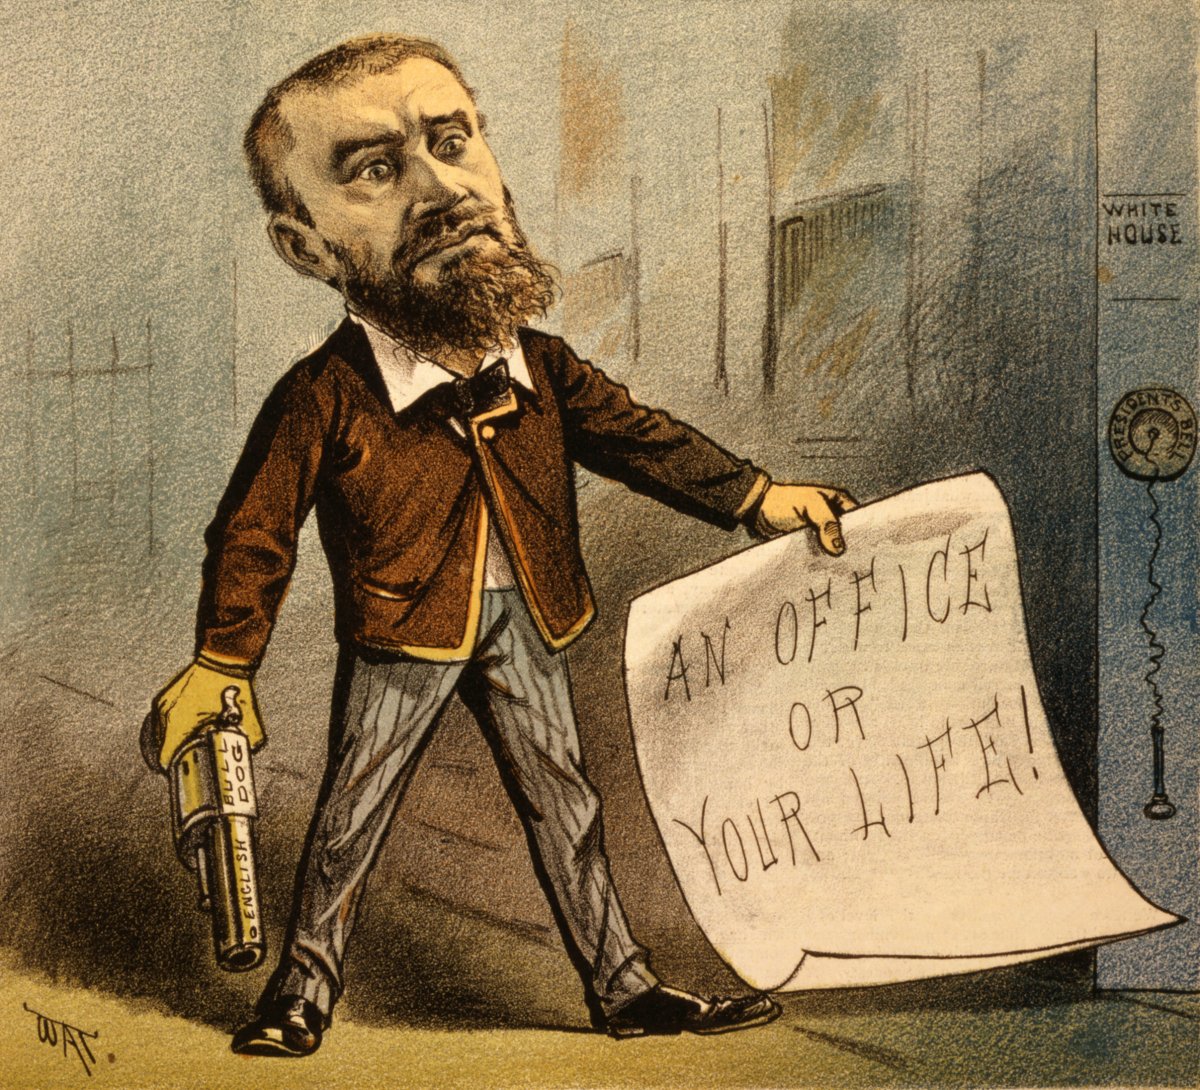 This political cartoon from July 13, 1881 depicts Charles Guiteau with the pistol he used to shoot Garfield and a note.